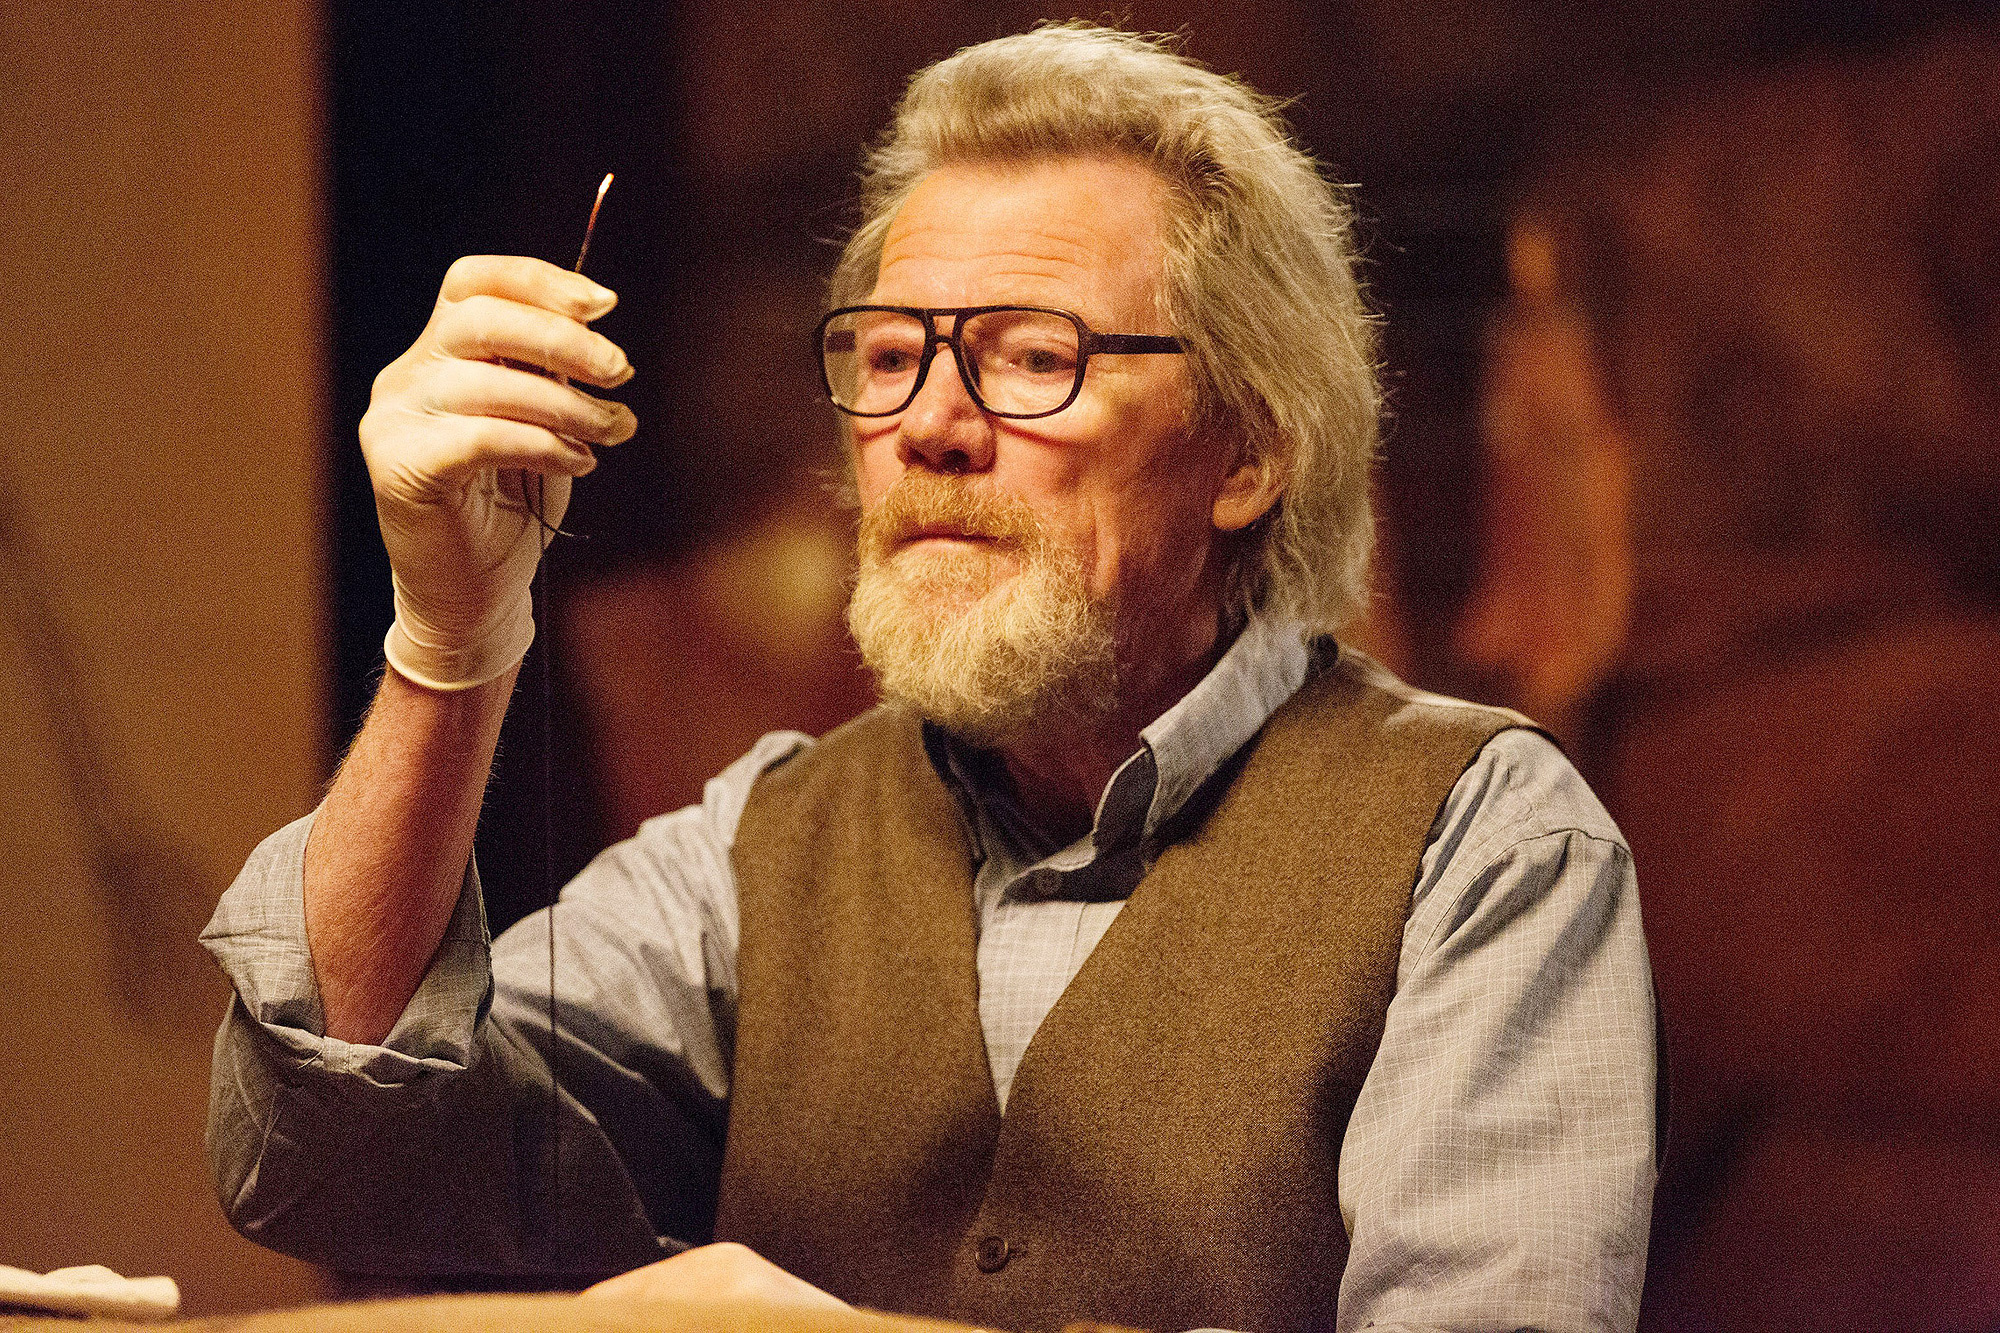 TUSK, Michael Parks, 2014. ©A24/courtesy Everett Collection